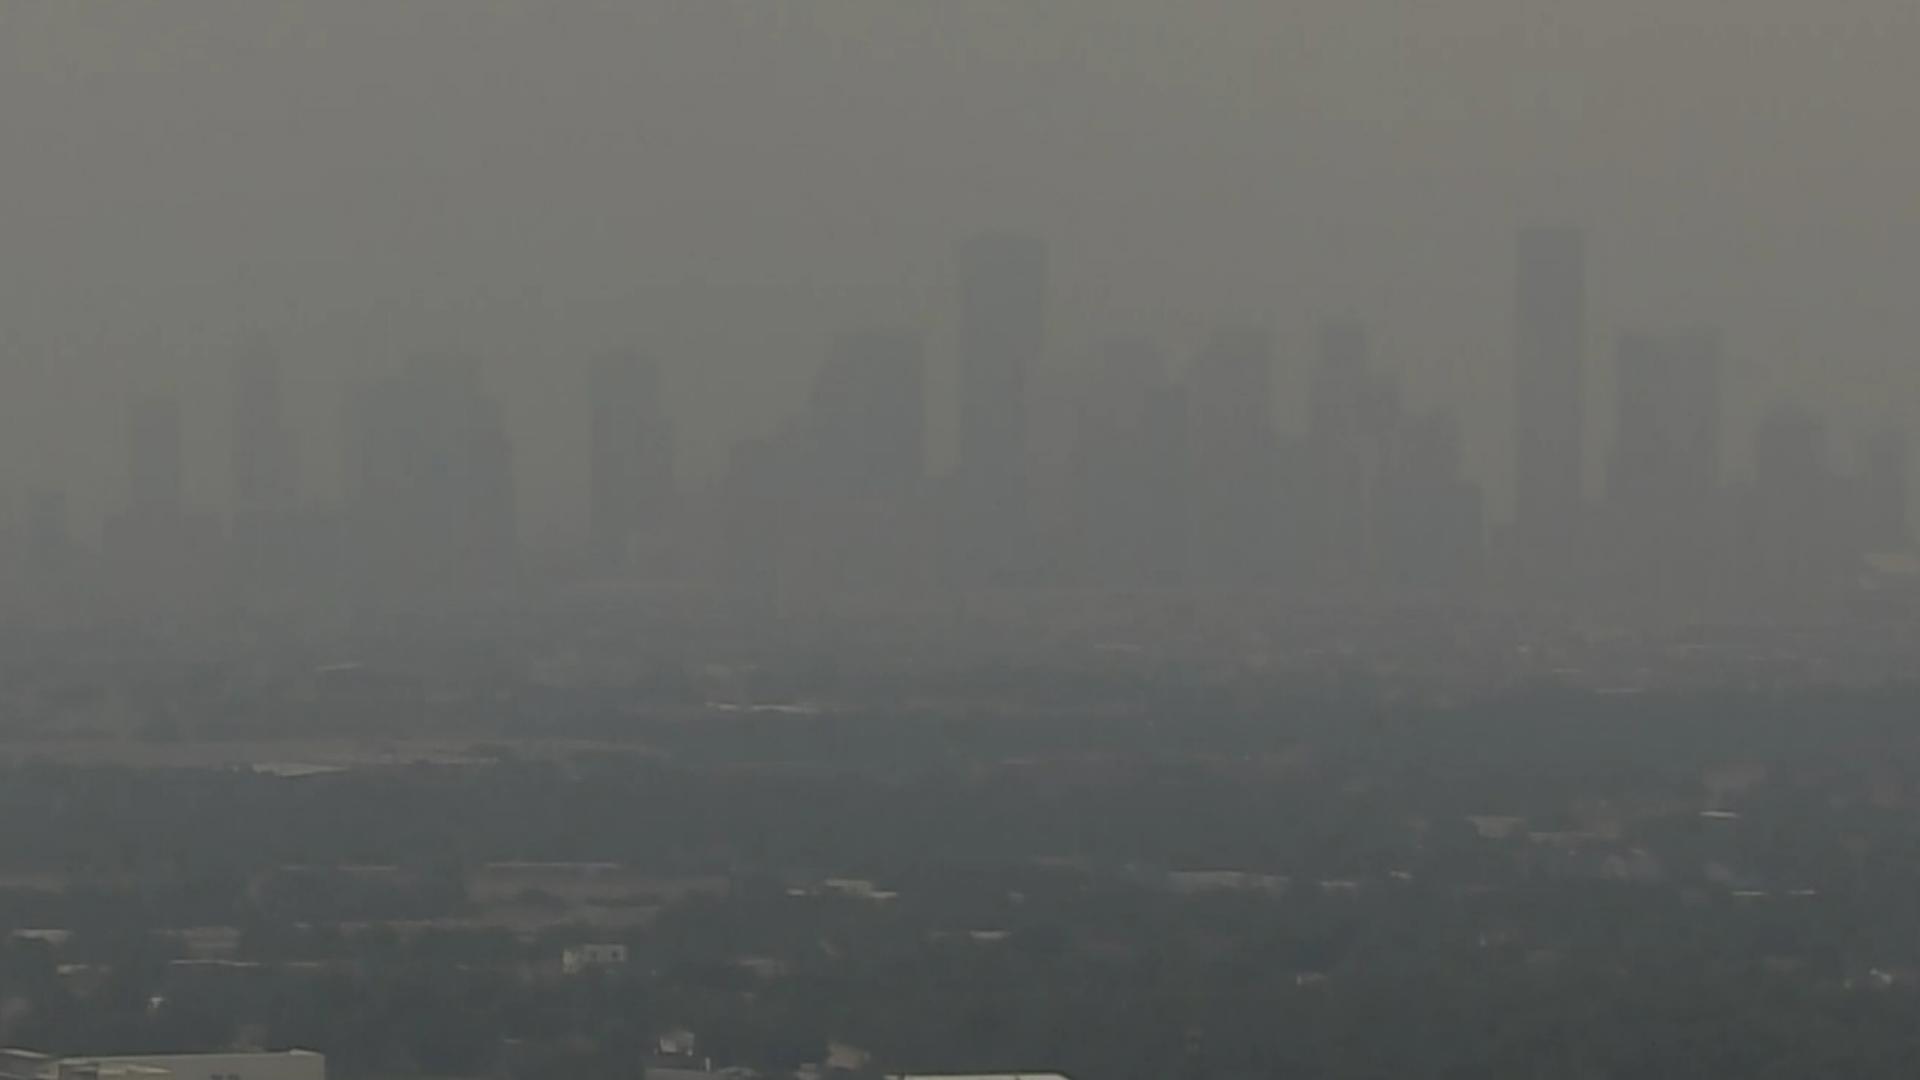 Smoke from agricultural fires in Mexico and Central America are sending smoke into the Houston area.